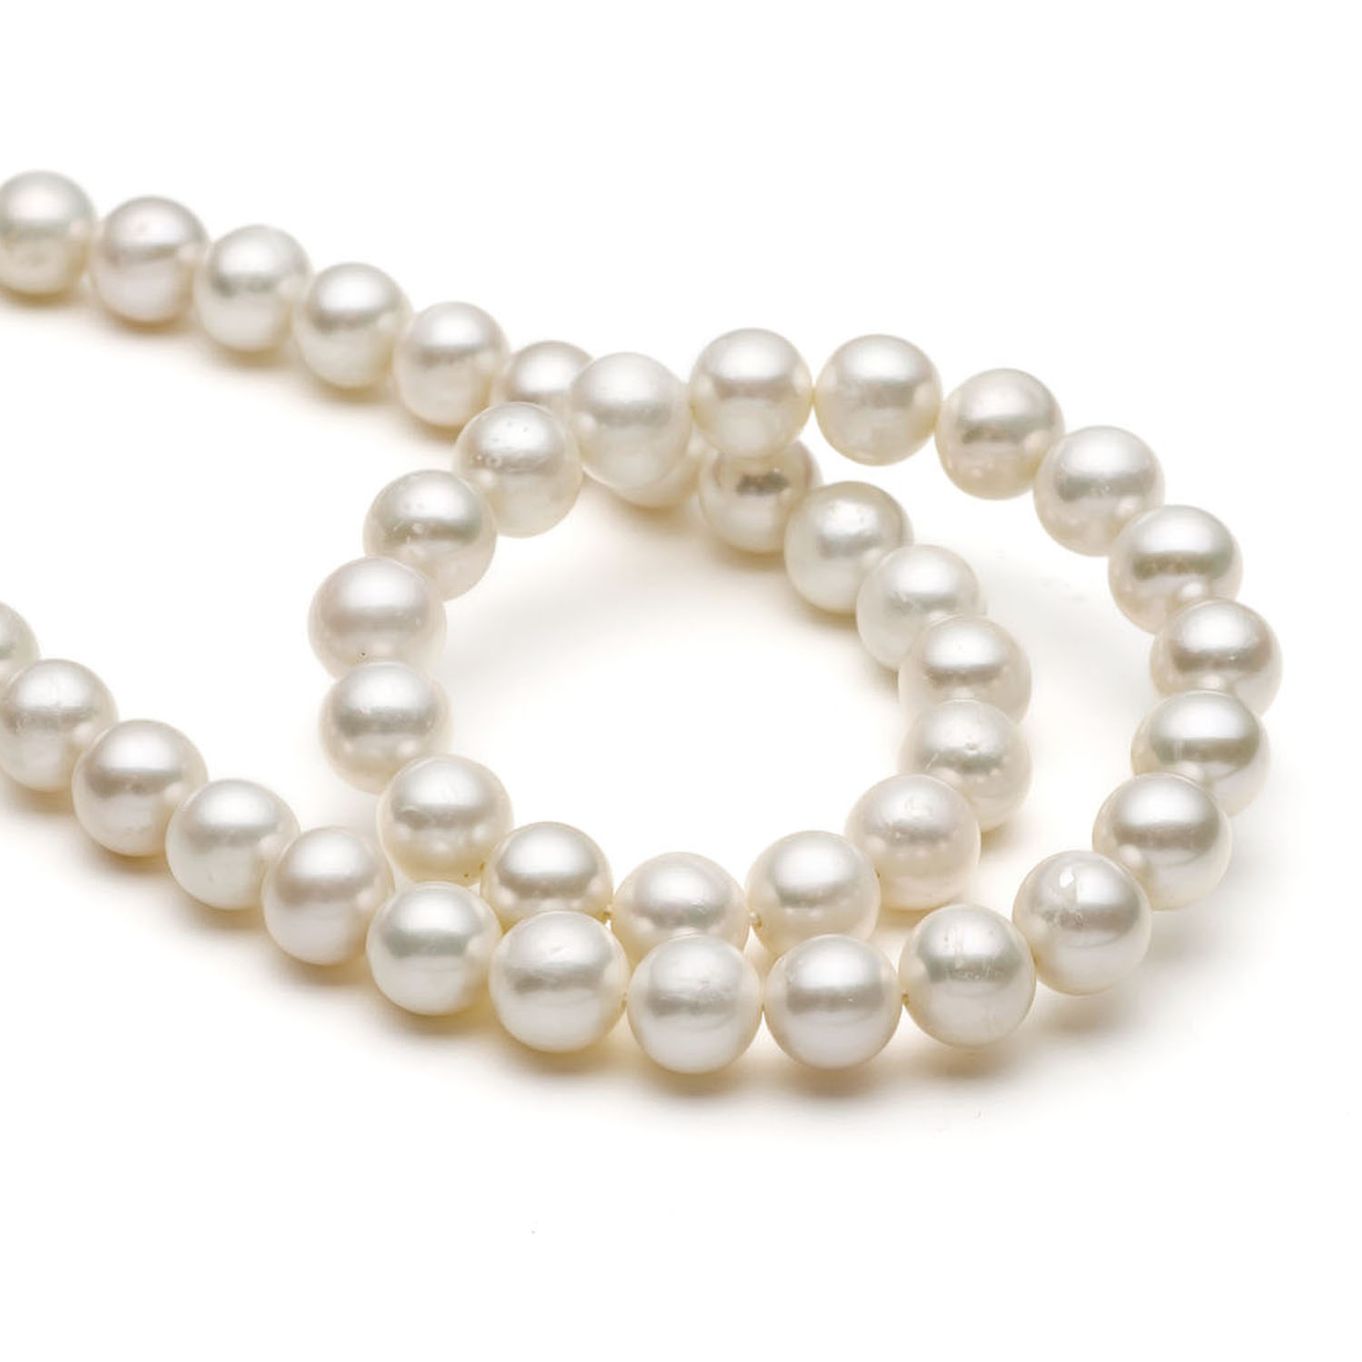 Cultured Freshwater Roundish White Pearls - Approx From 7mm